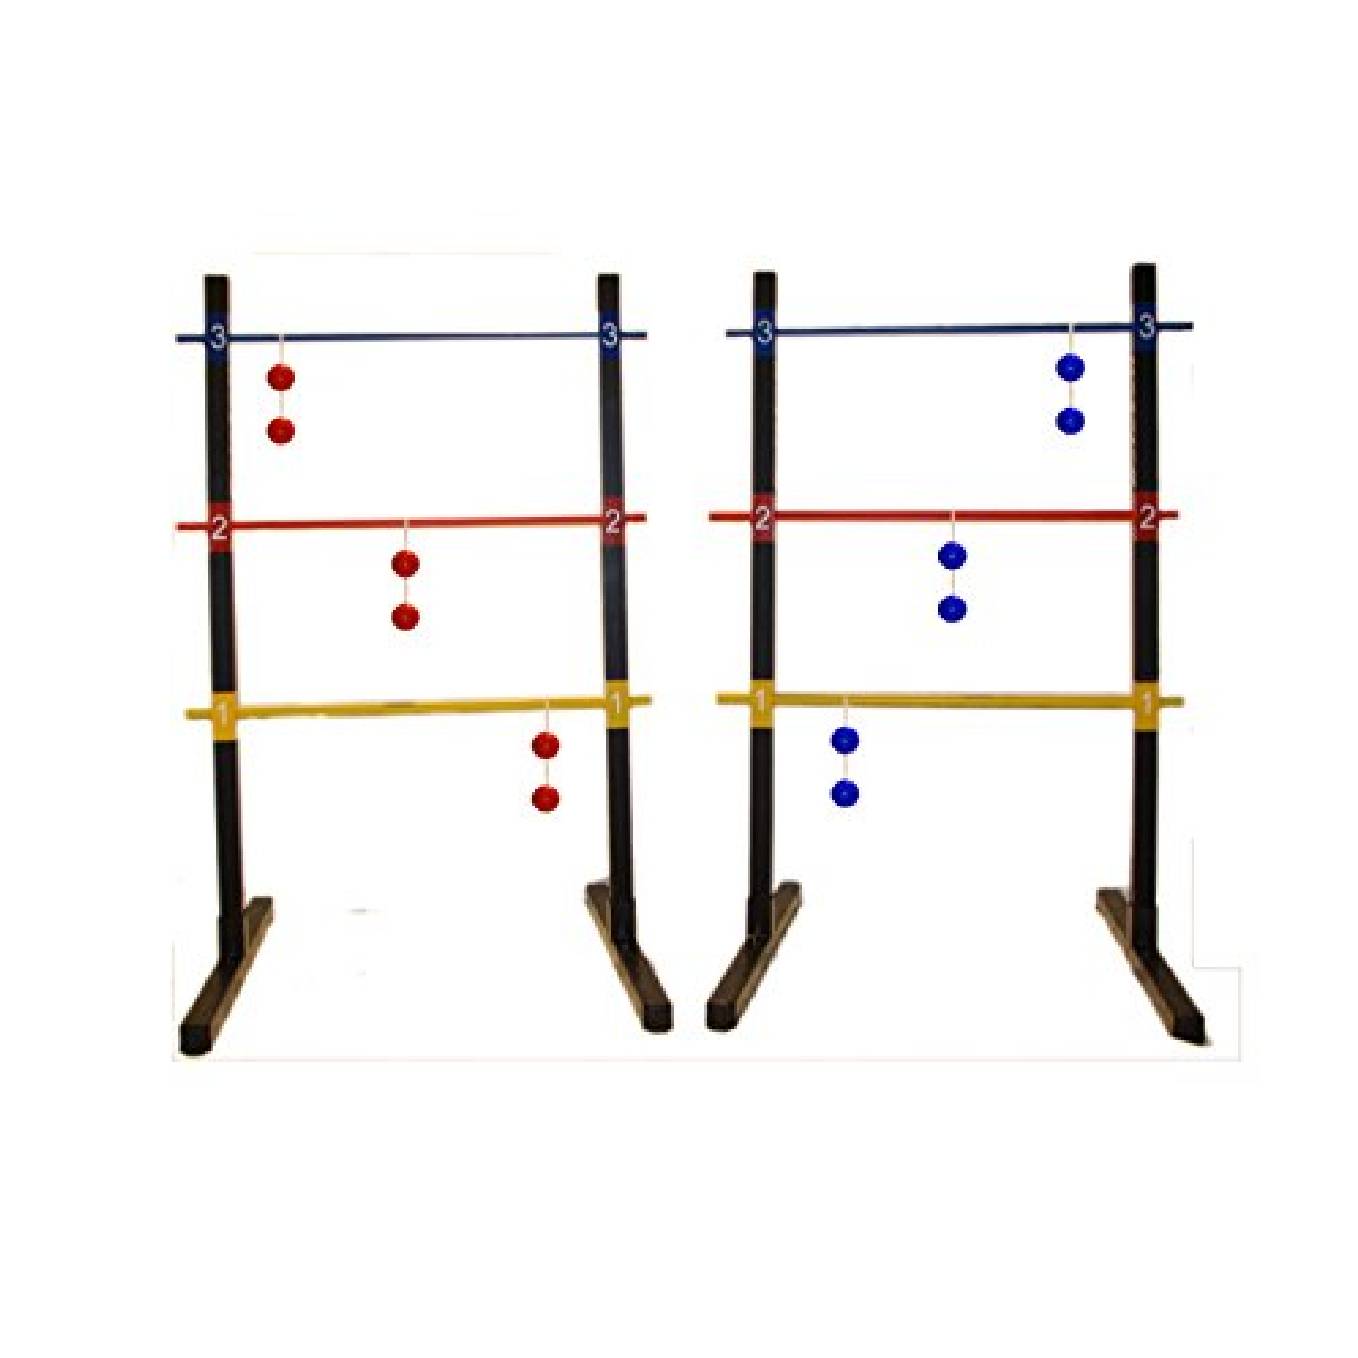 Ladder Toss Unleashed: Bolaball's Stand Set Brings Joy Indoors and Out!